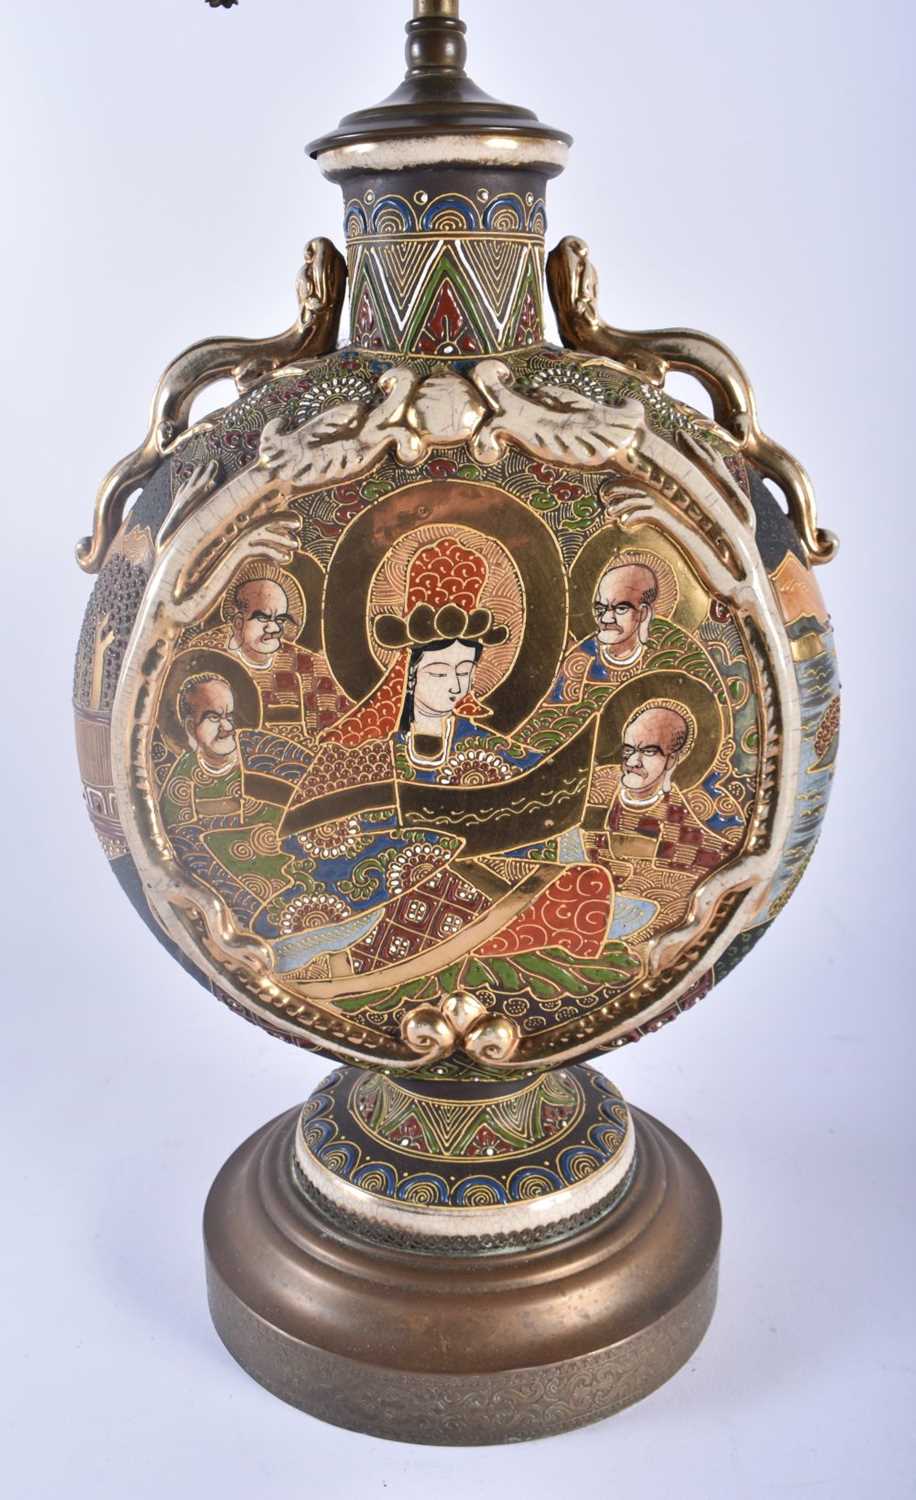 A LATE 19TH CENTURY JAPANESE MEIJI PERIOD SATSUMA LAMP painted with scholars. 60 cm high. - Image 3 of 4